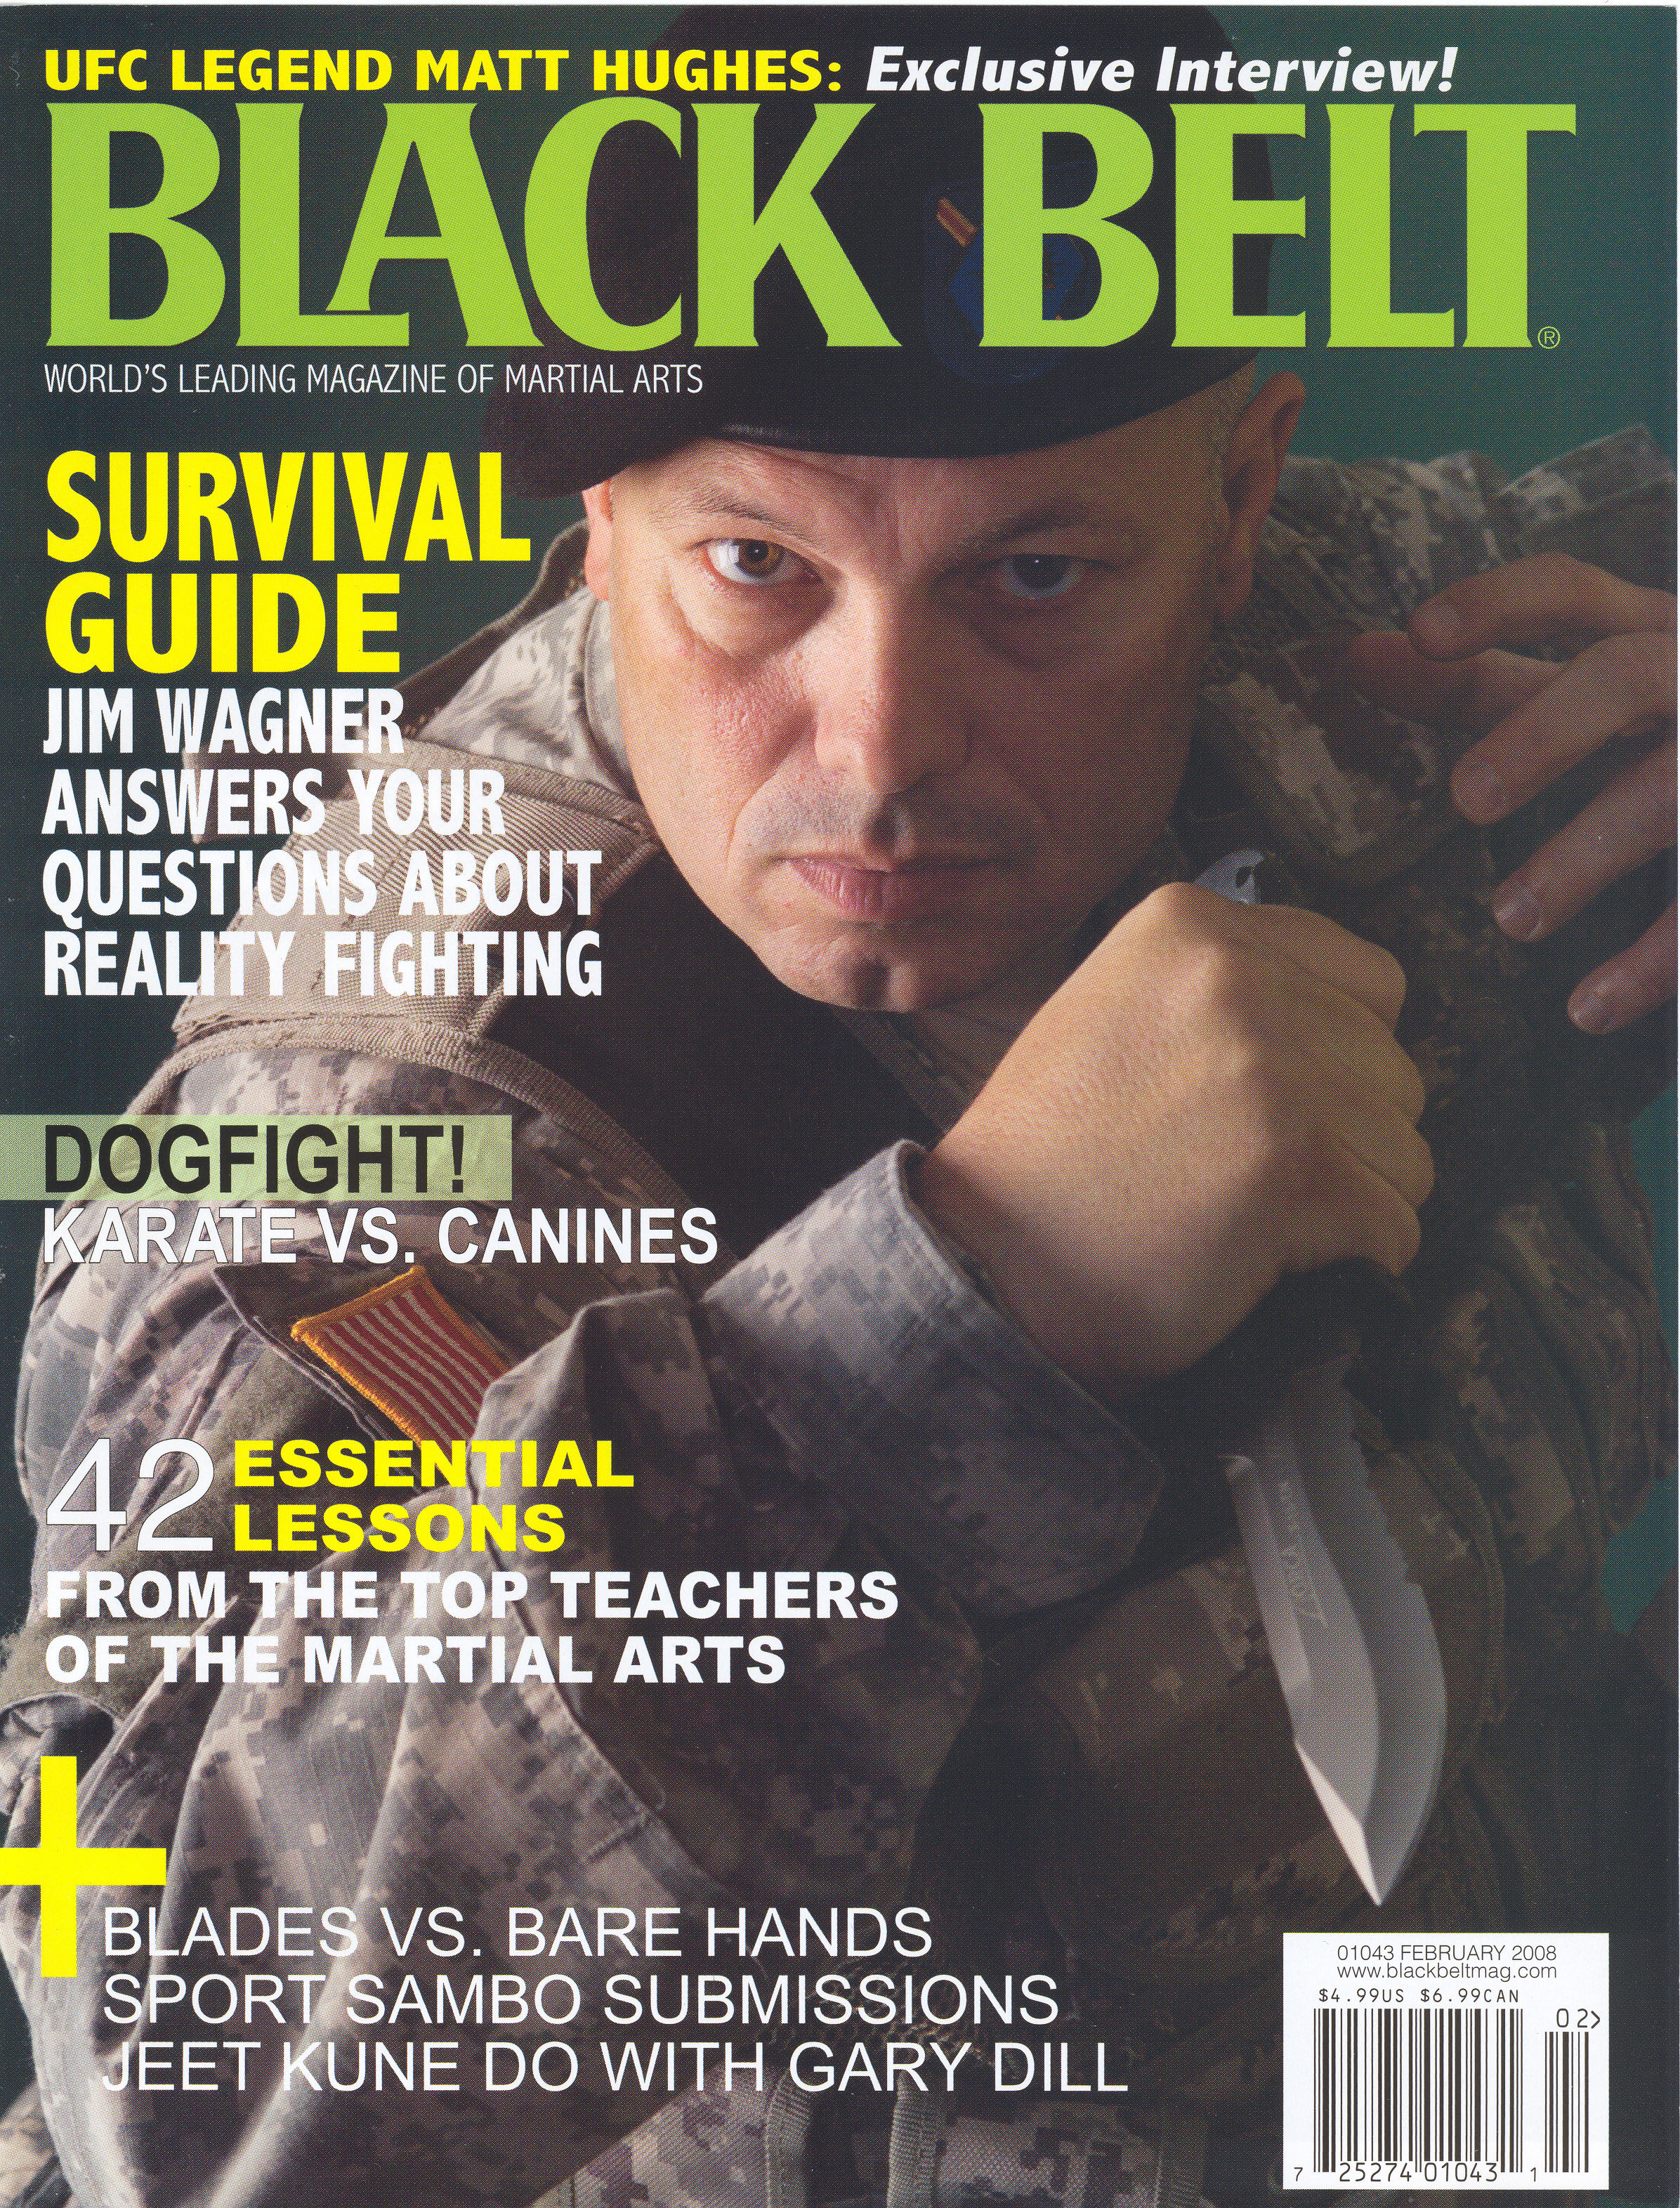 Jim Wagner is one of the top martial arts instructor in the world, and is a former counterterrorist, soldier, police officer, SWAT officer, diplomatic bodyguard, and jailer. This is the second time he has appeared on the cover of Black Belt magazine.